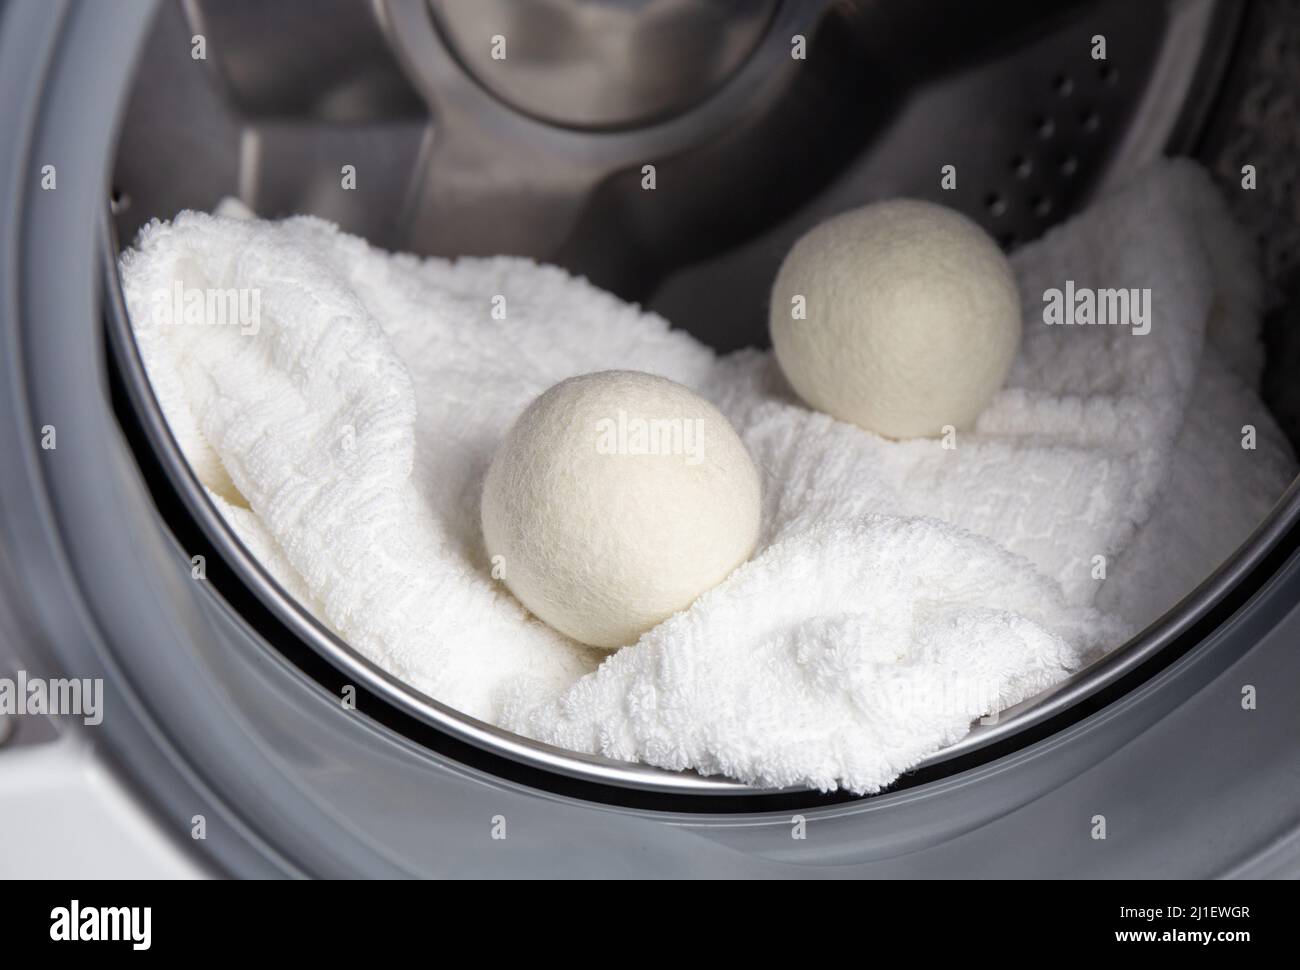 Using wool dryer balls for more soft clothes while tumble drying in washing machine concept. Discharge static electricity and shorten drying time. Stock Photo